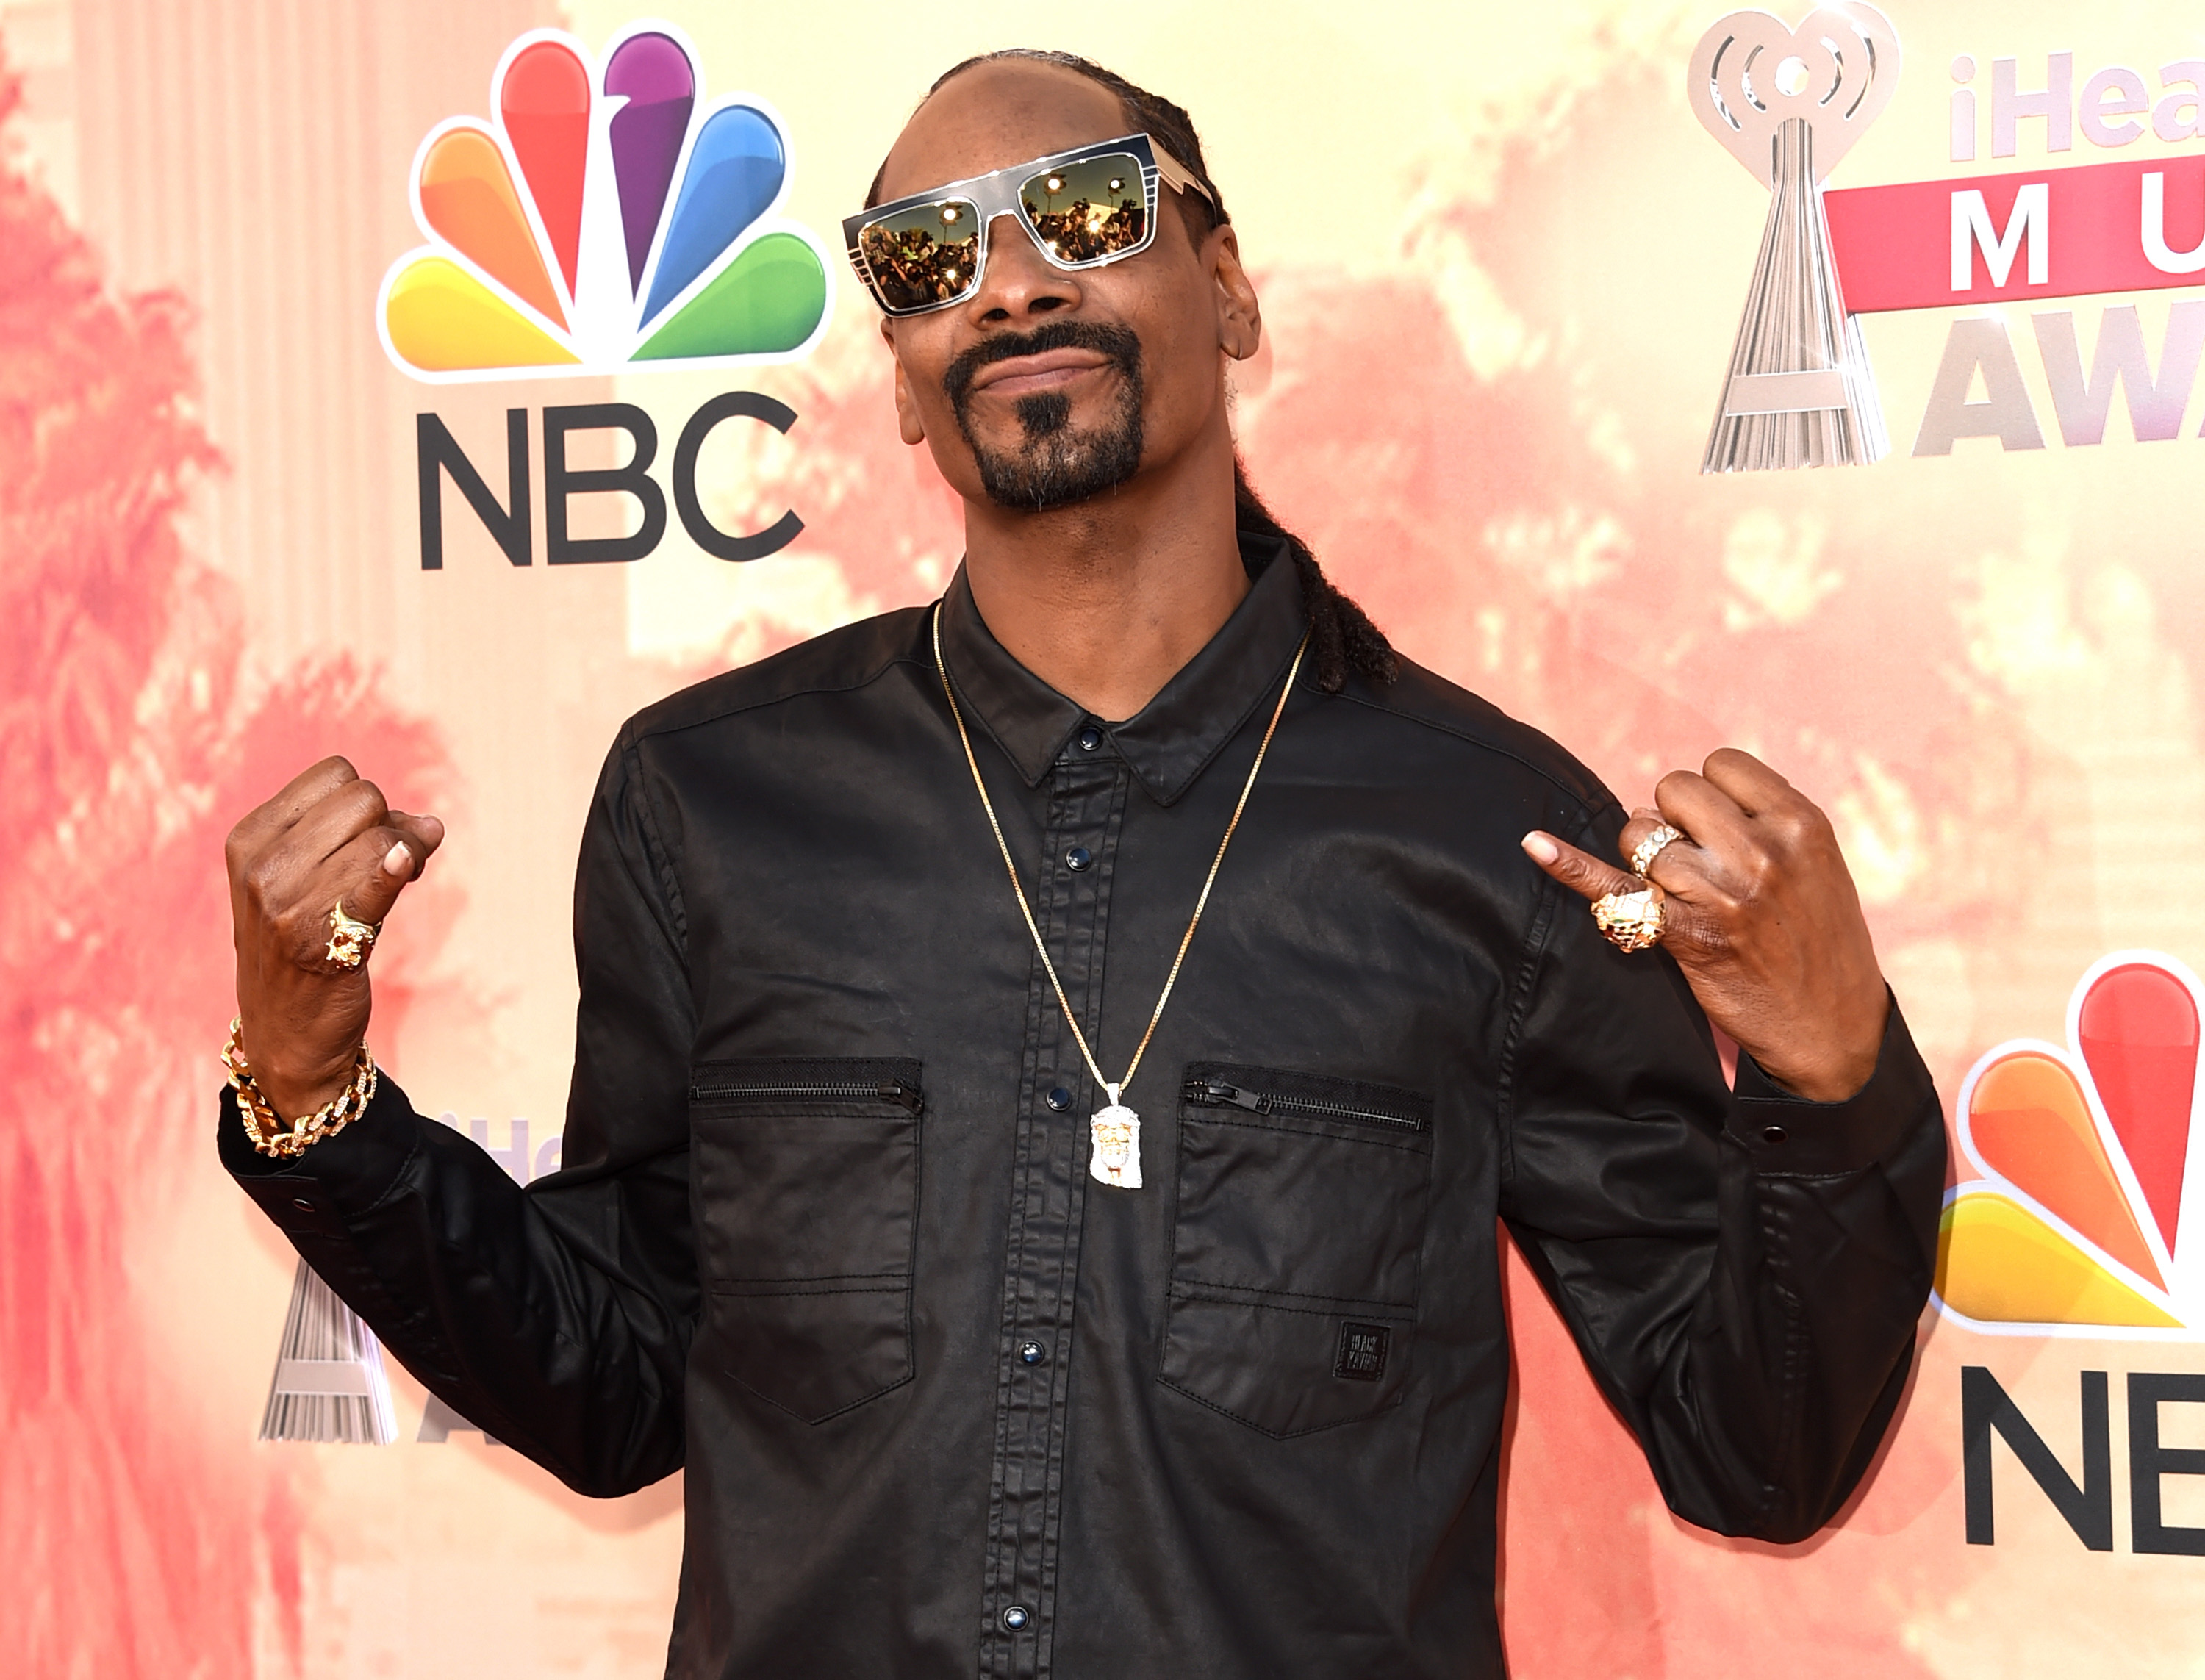 Rapper Snoop Dogg attends the 2015 iHeartRadio Music Awards which broadcasted live on NBC from The Shrine Auditorium on March 29, 2015 in Los Angeles, California.  (Photo by Jason Merritt/Getty Images for iHeartMedia) (Jason Merritt-Getty Images for iHeartMedia)